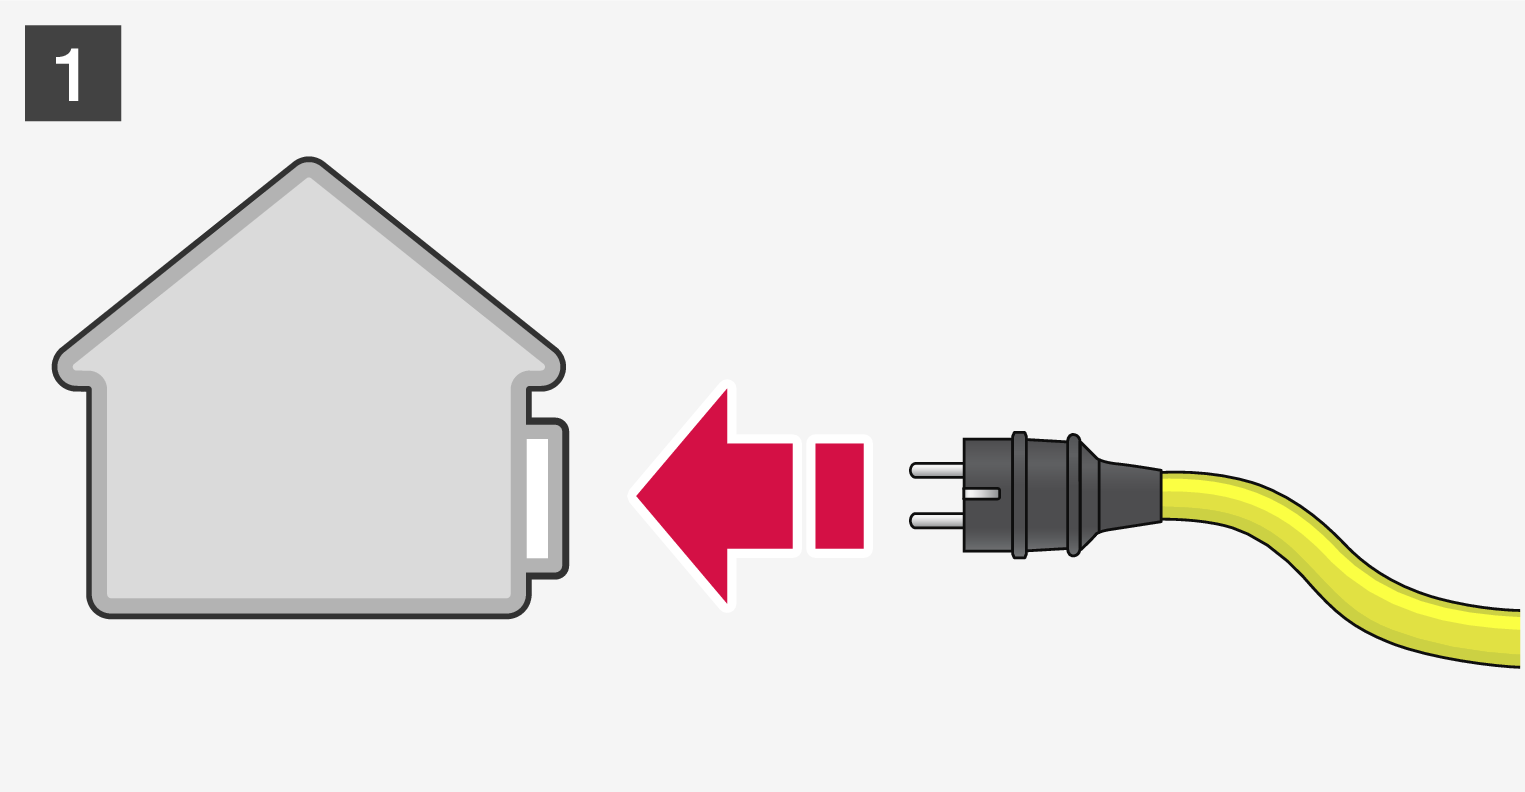 P5-1817-Hybrid-Plug in cable to house (EU+CH)